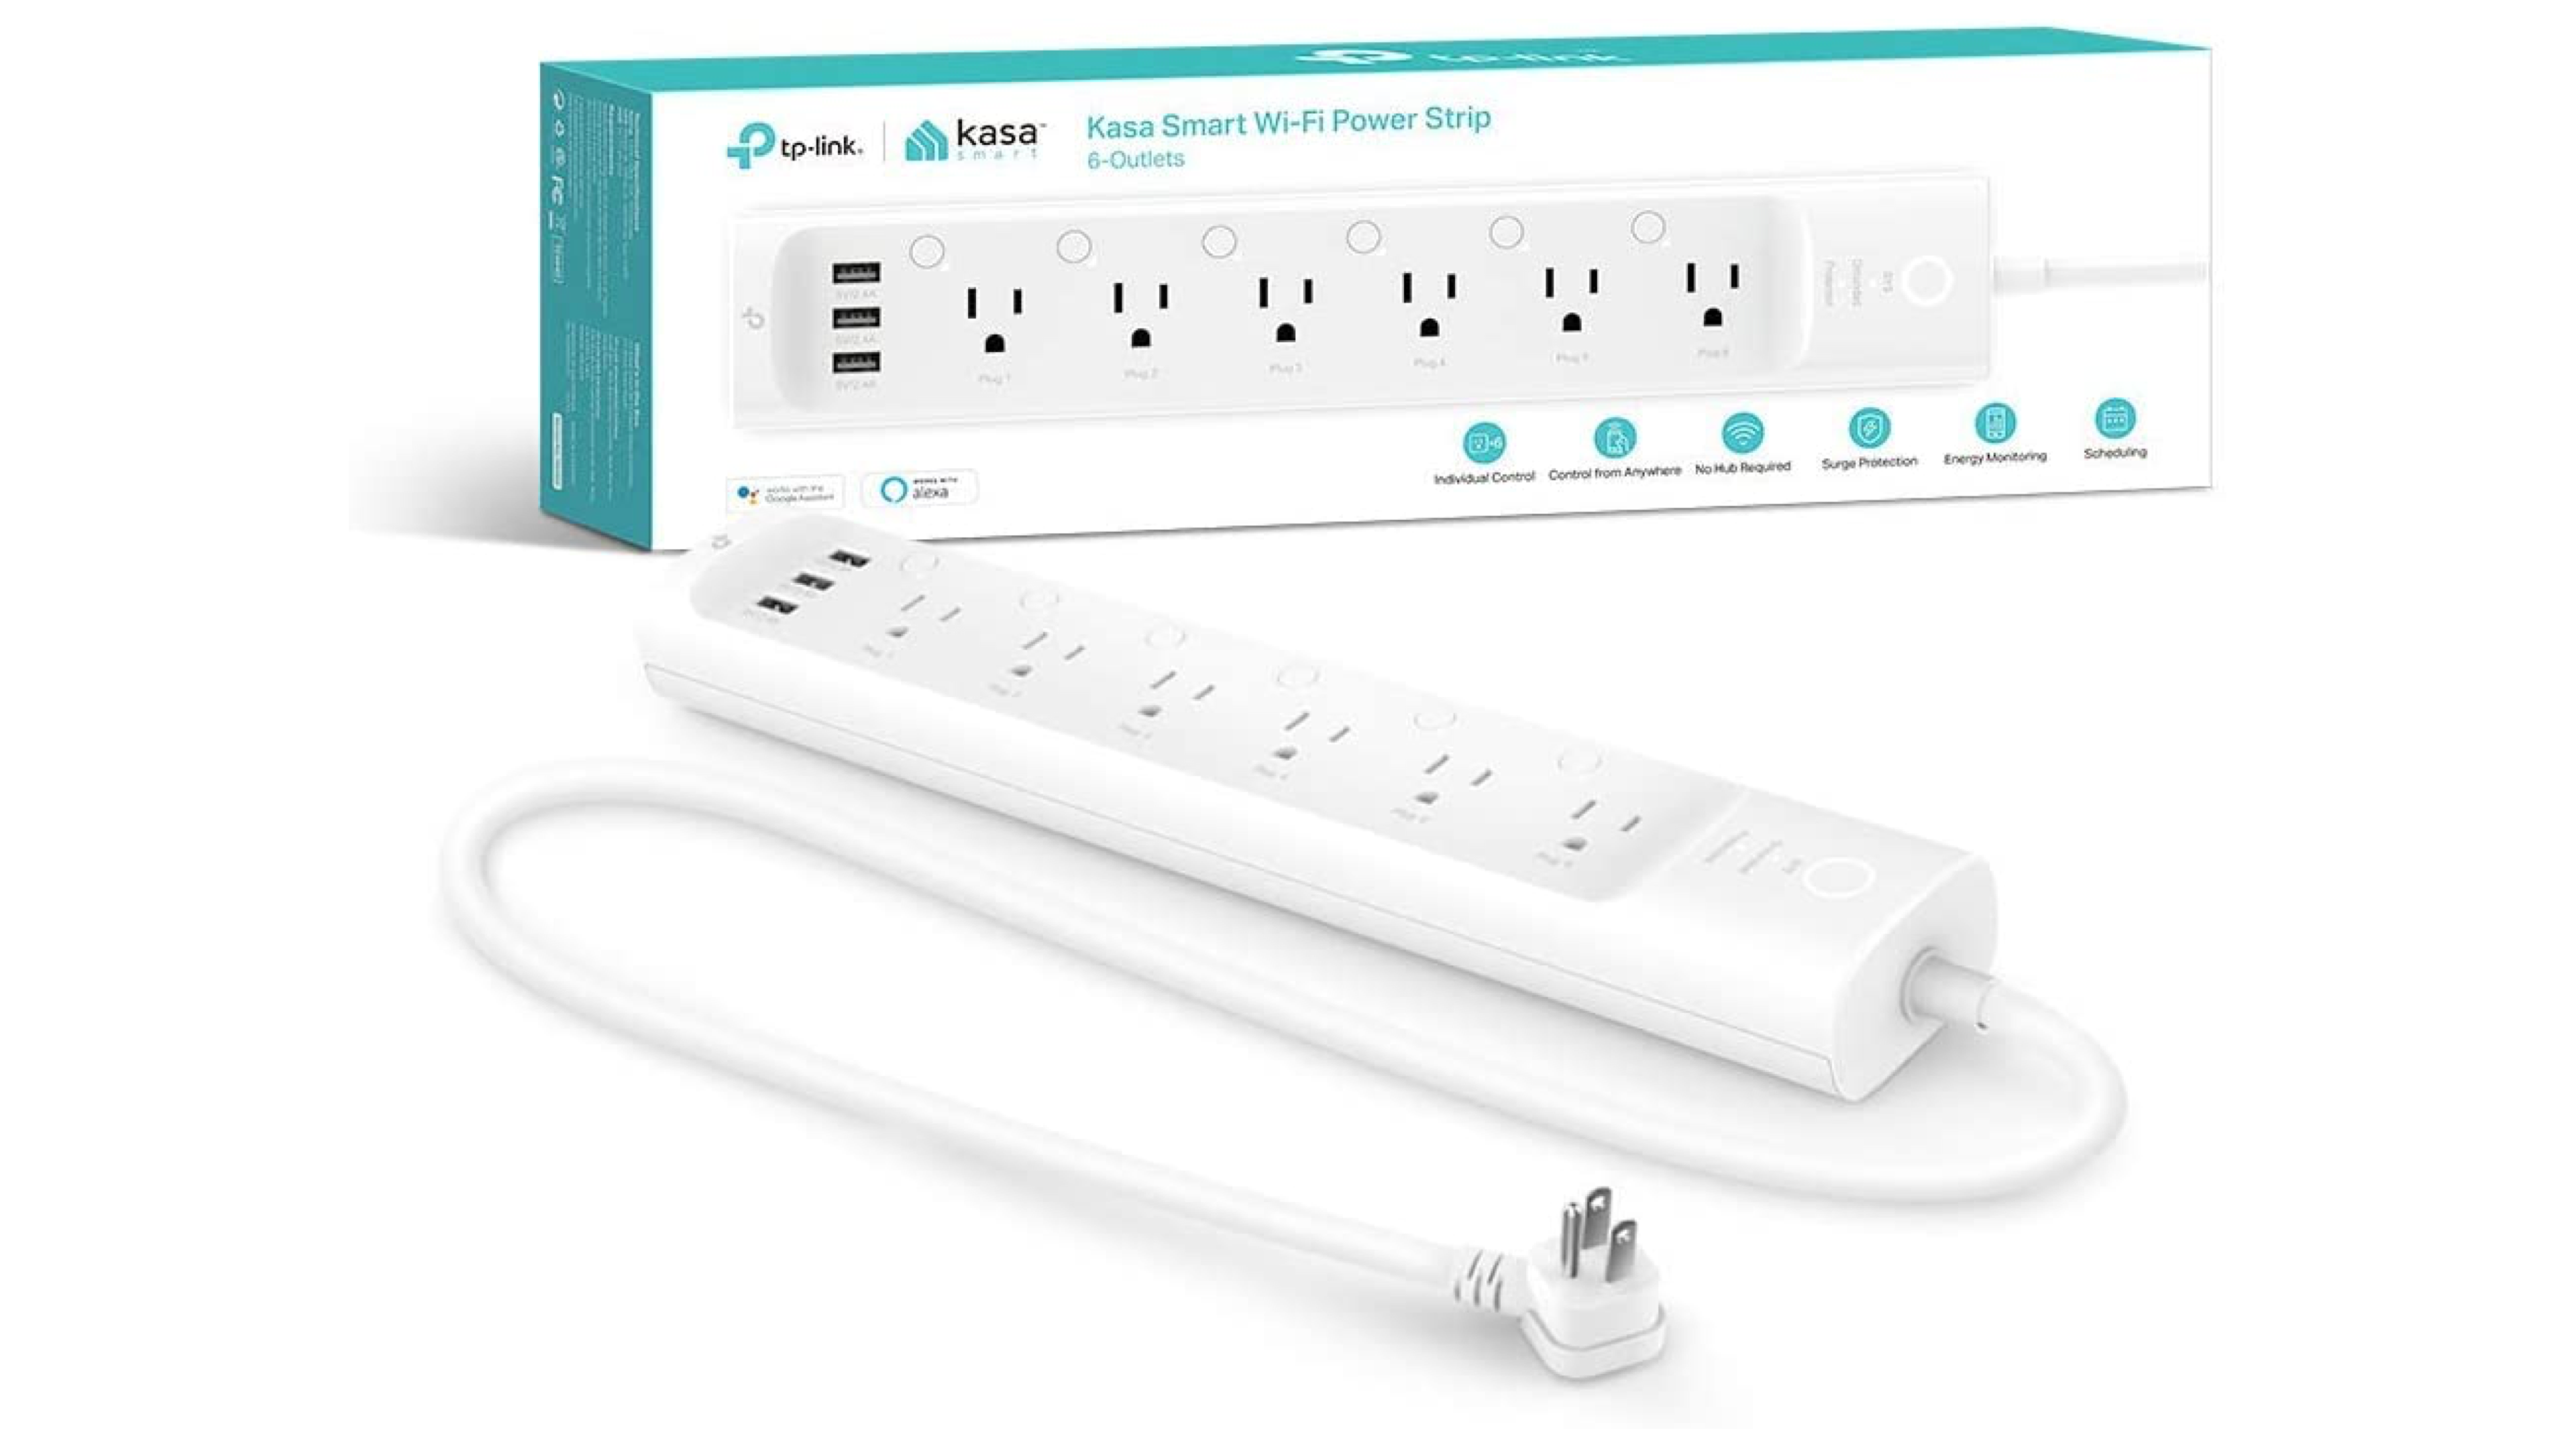 smart power strip that can voice control plugged-in devices